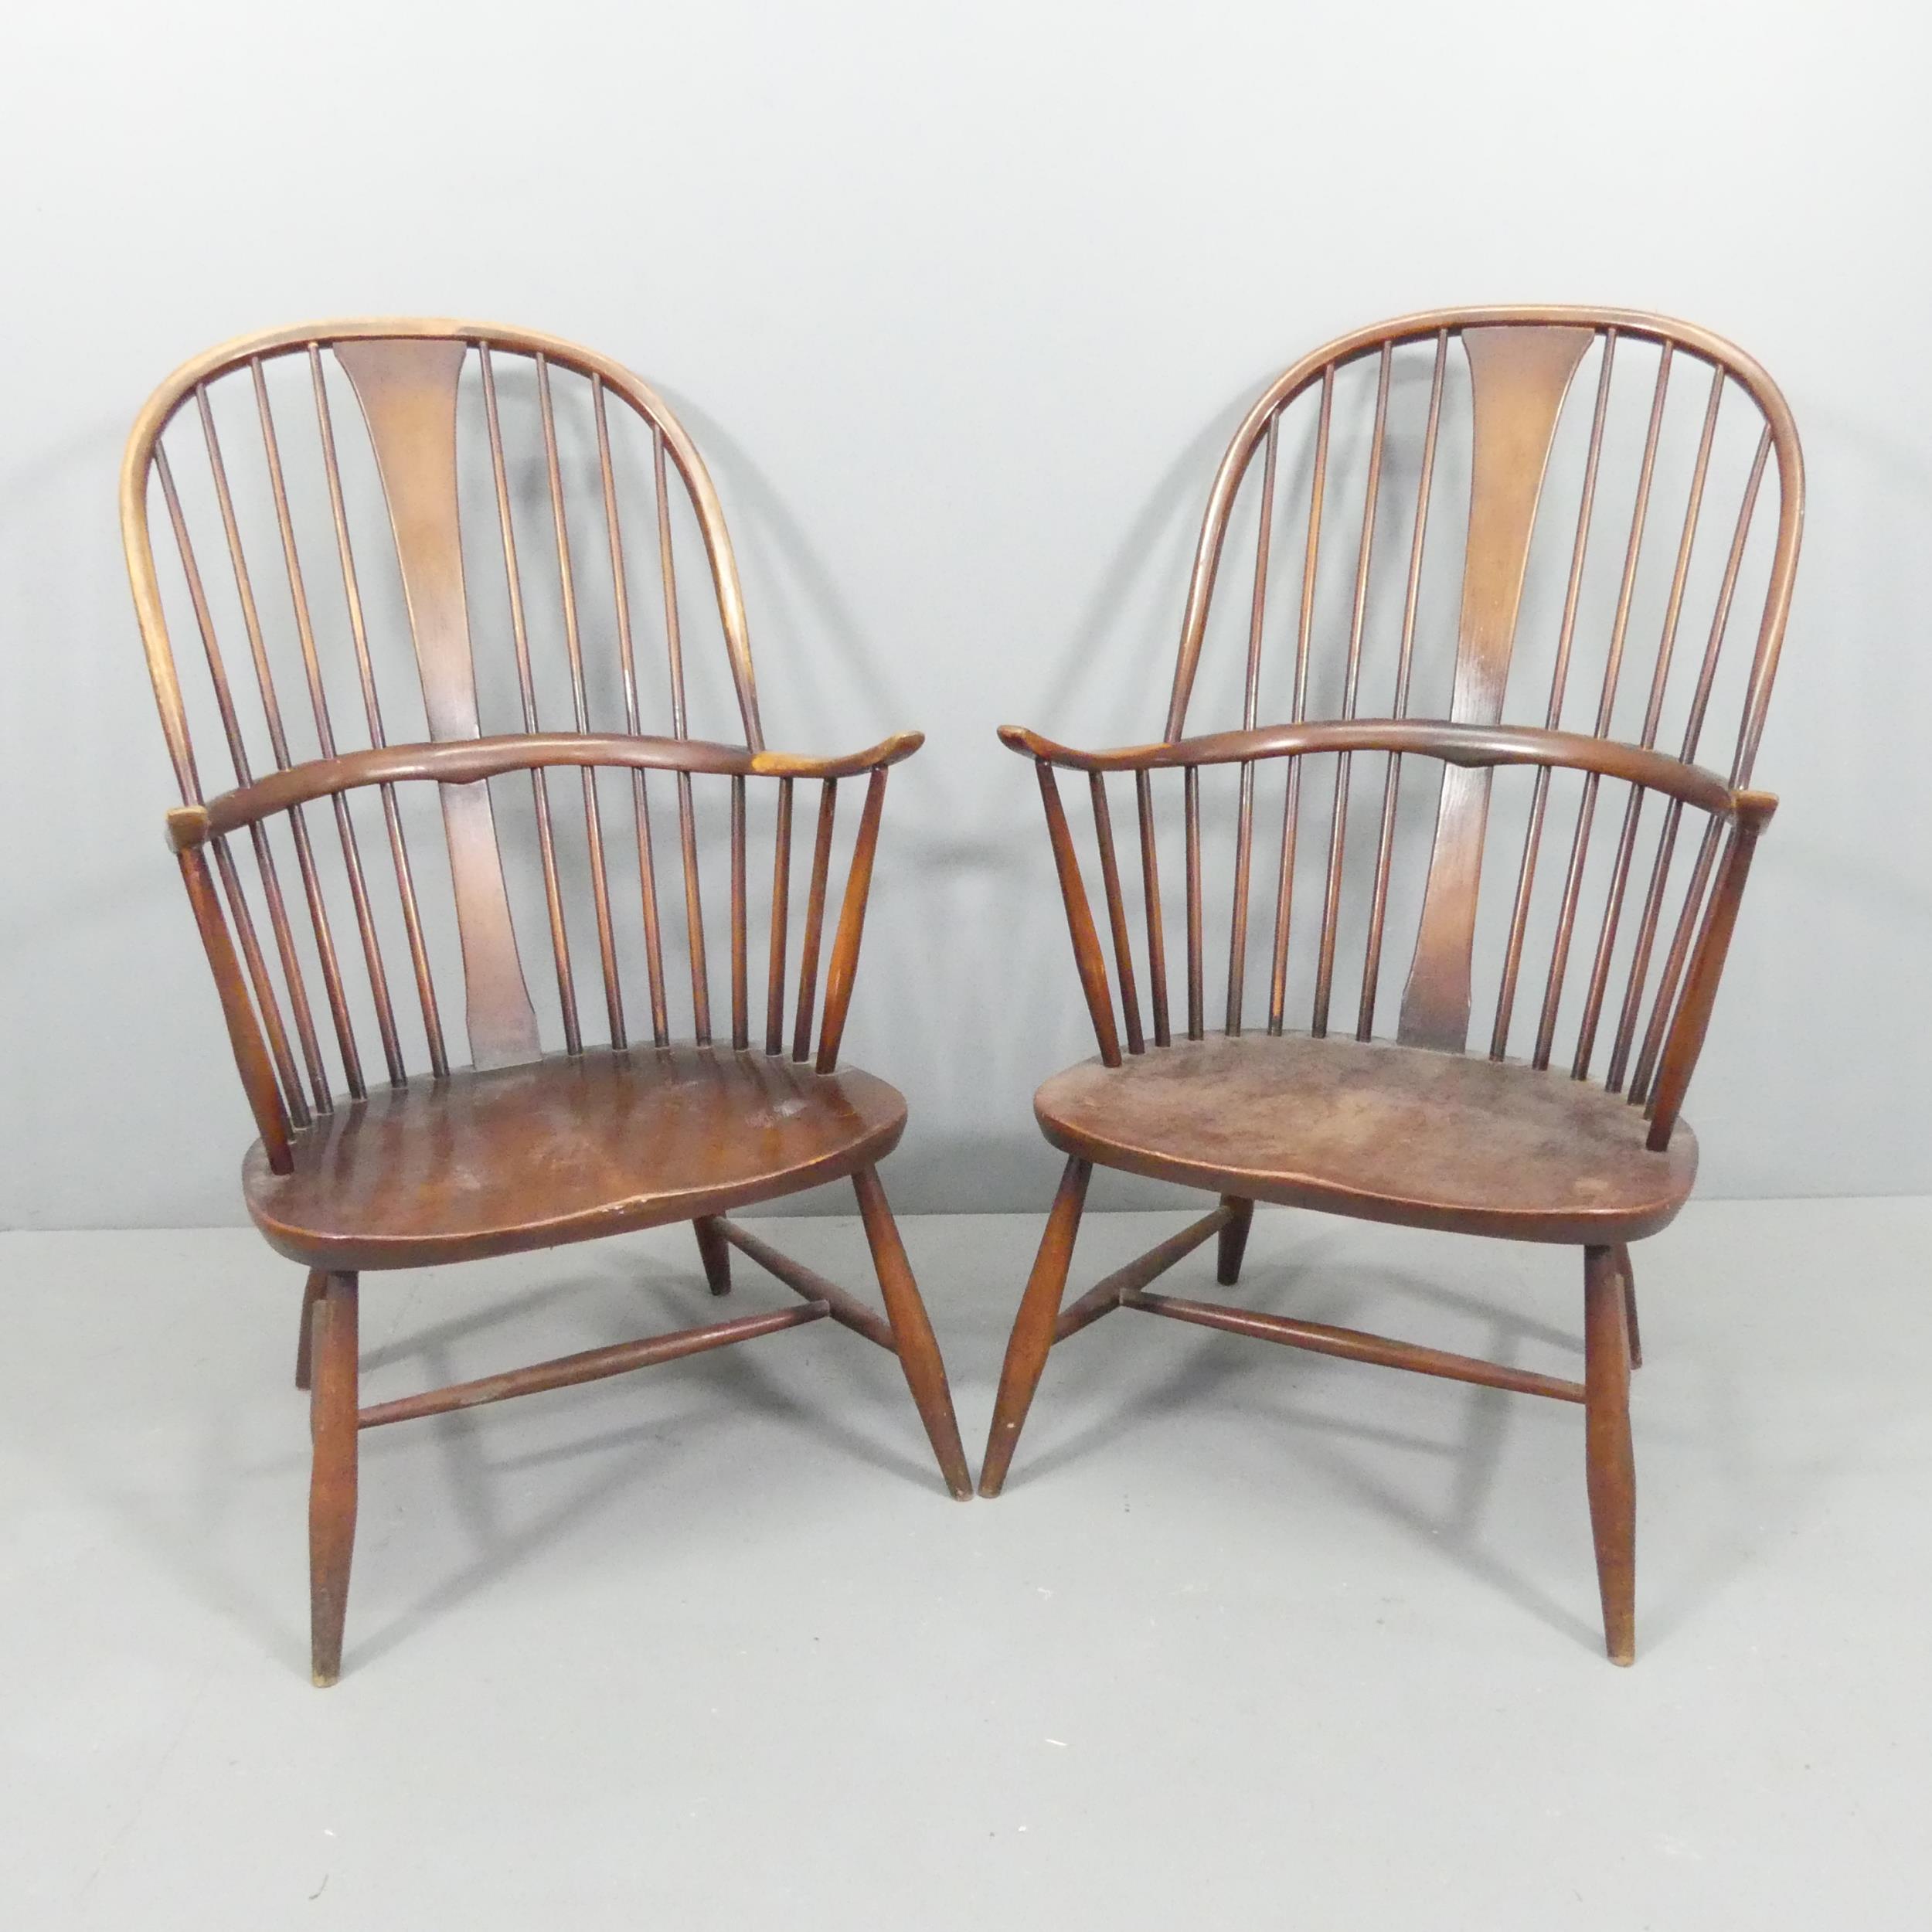 ERCOL - a pair of mid-century Chairmaker's comb-back elbow chairs. With maker's labels.